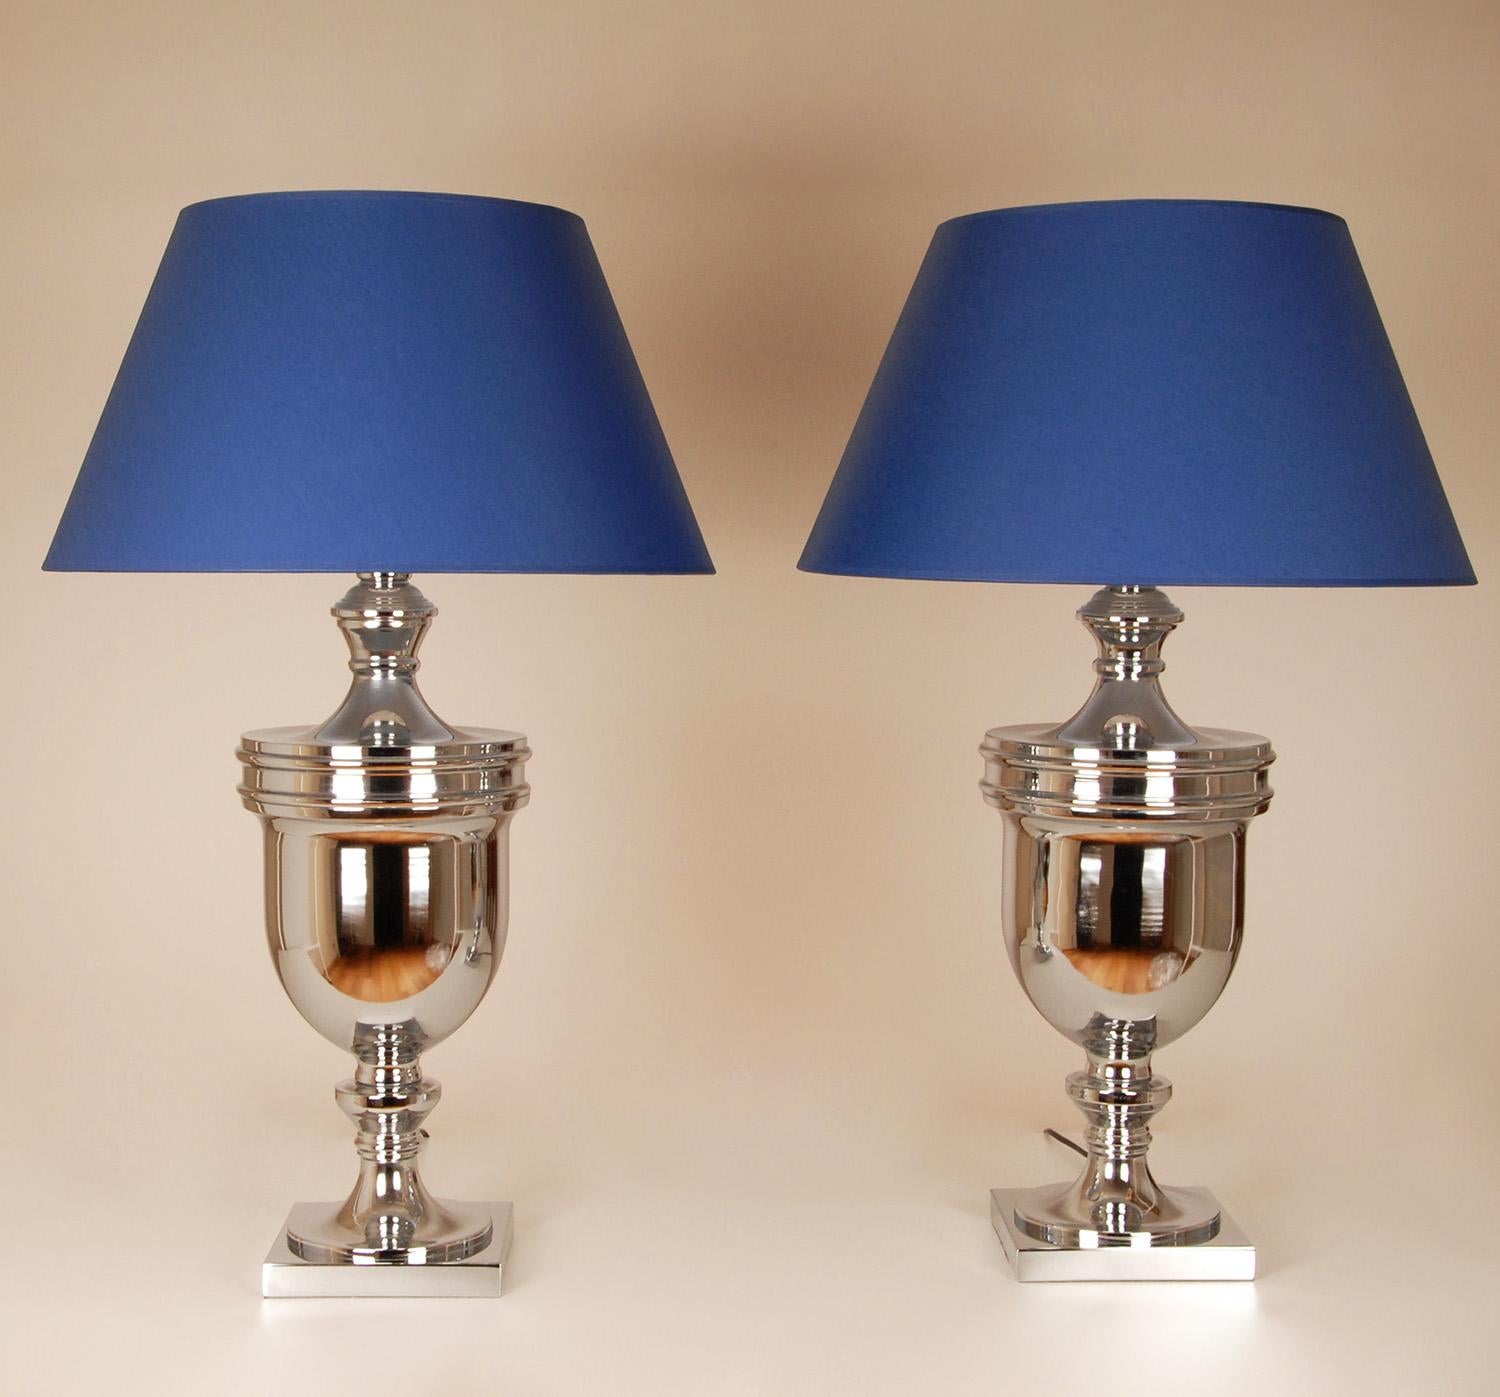 Vintage a pair tall modern silver colored vase lamps table lamps
Silver with Royal blue lampshades ( new condition )
Style: Modern , timeless, design
Design: In the manner of Karl Springer, Frederich Cooper, Stiffel
Origin: France,